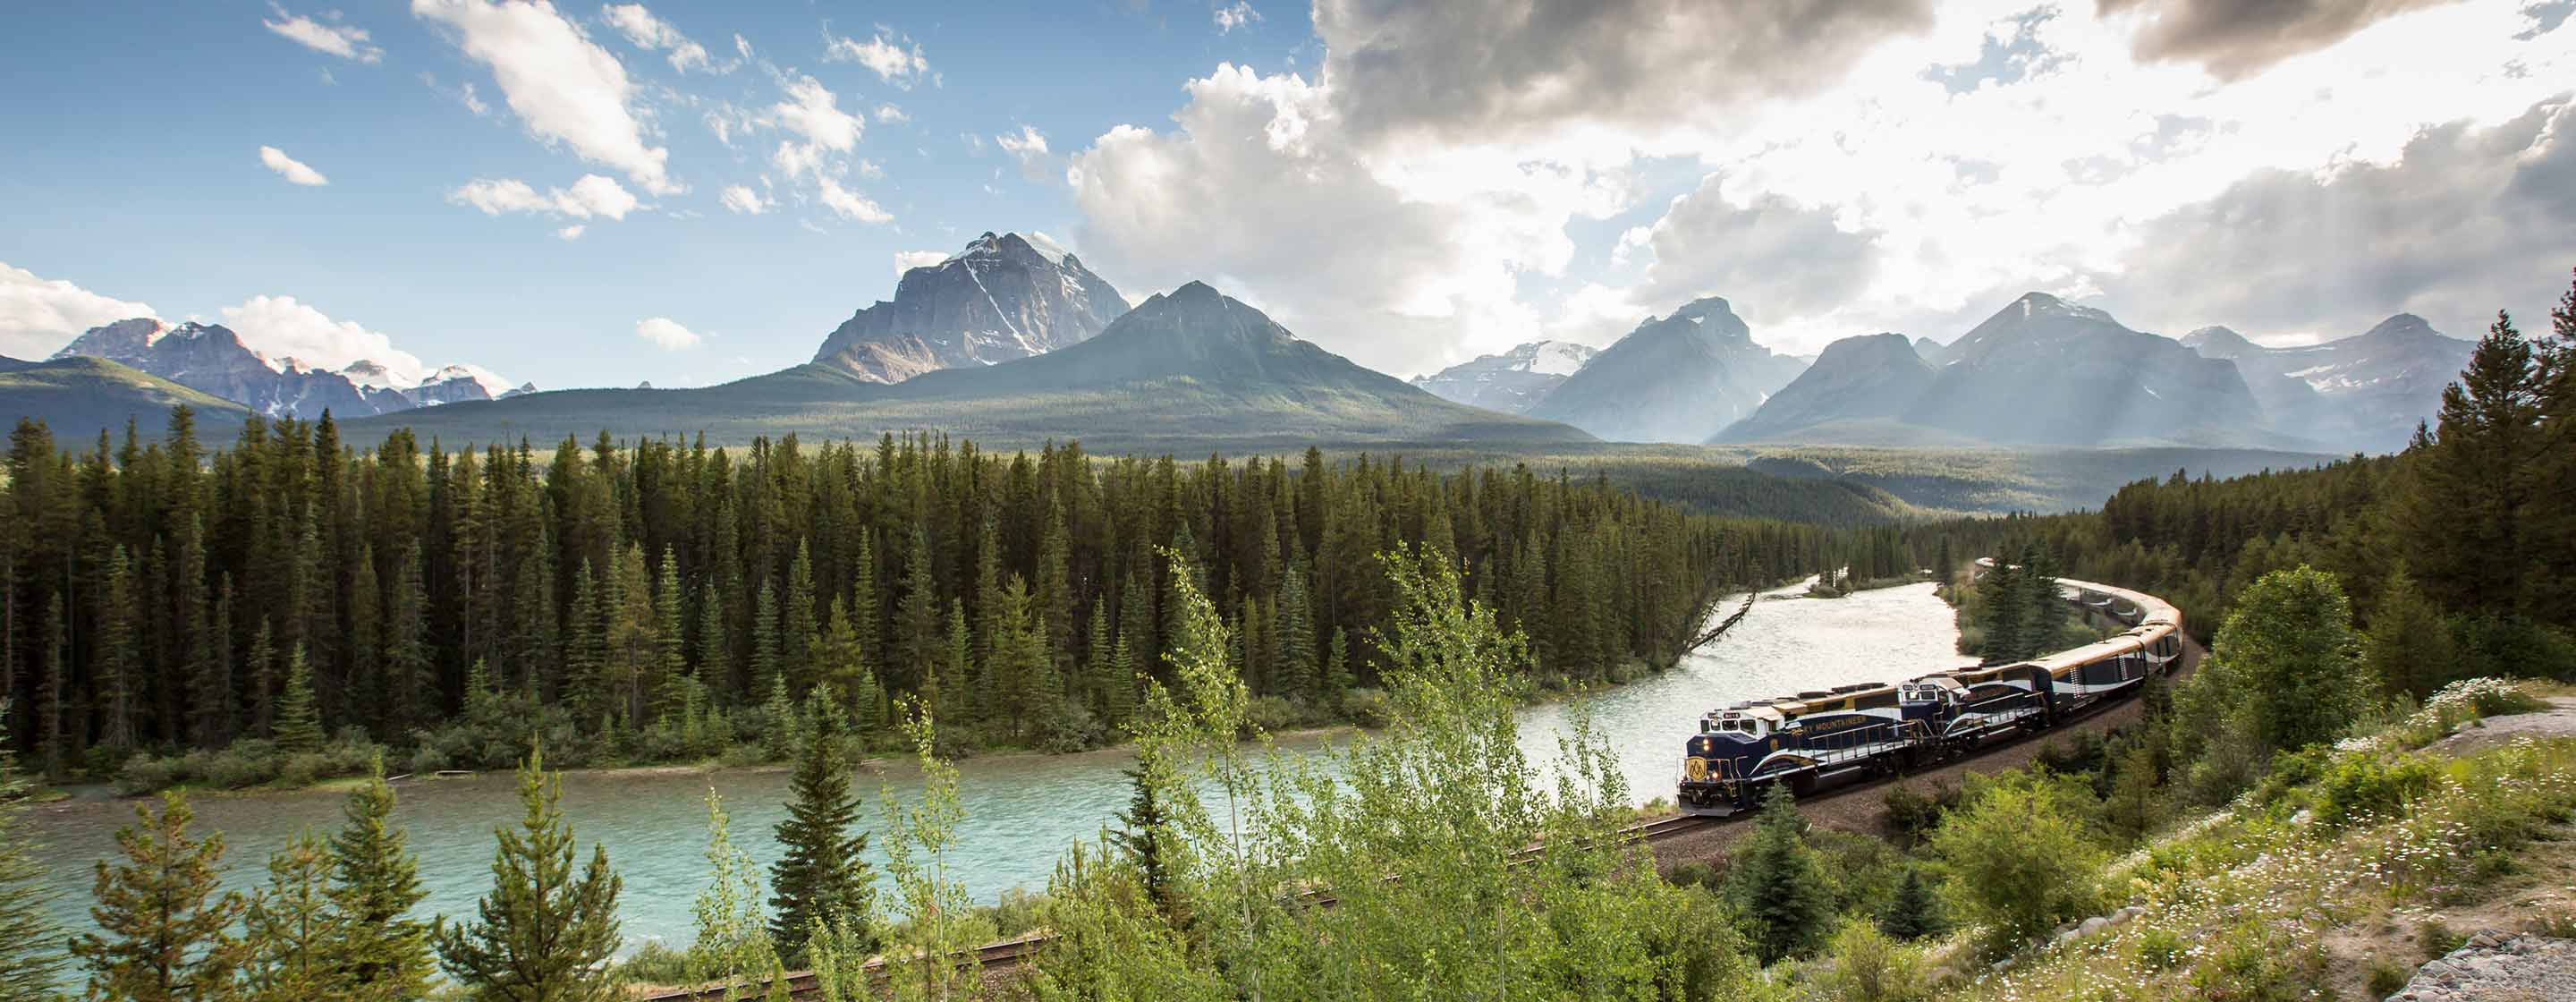 Rocky Mountaineer train in Morant's Curve